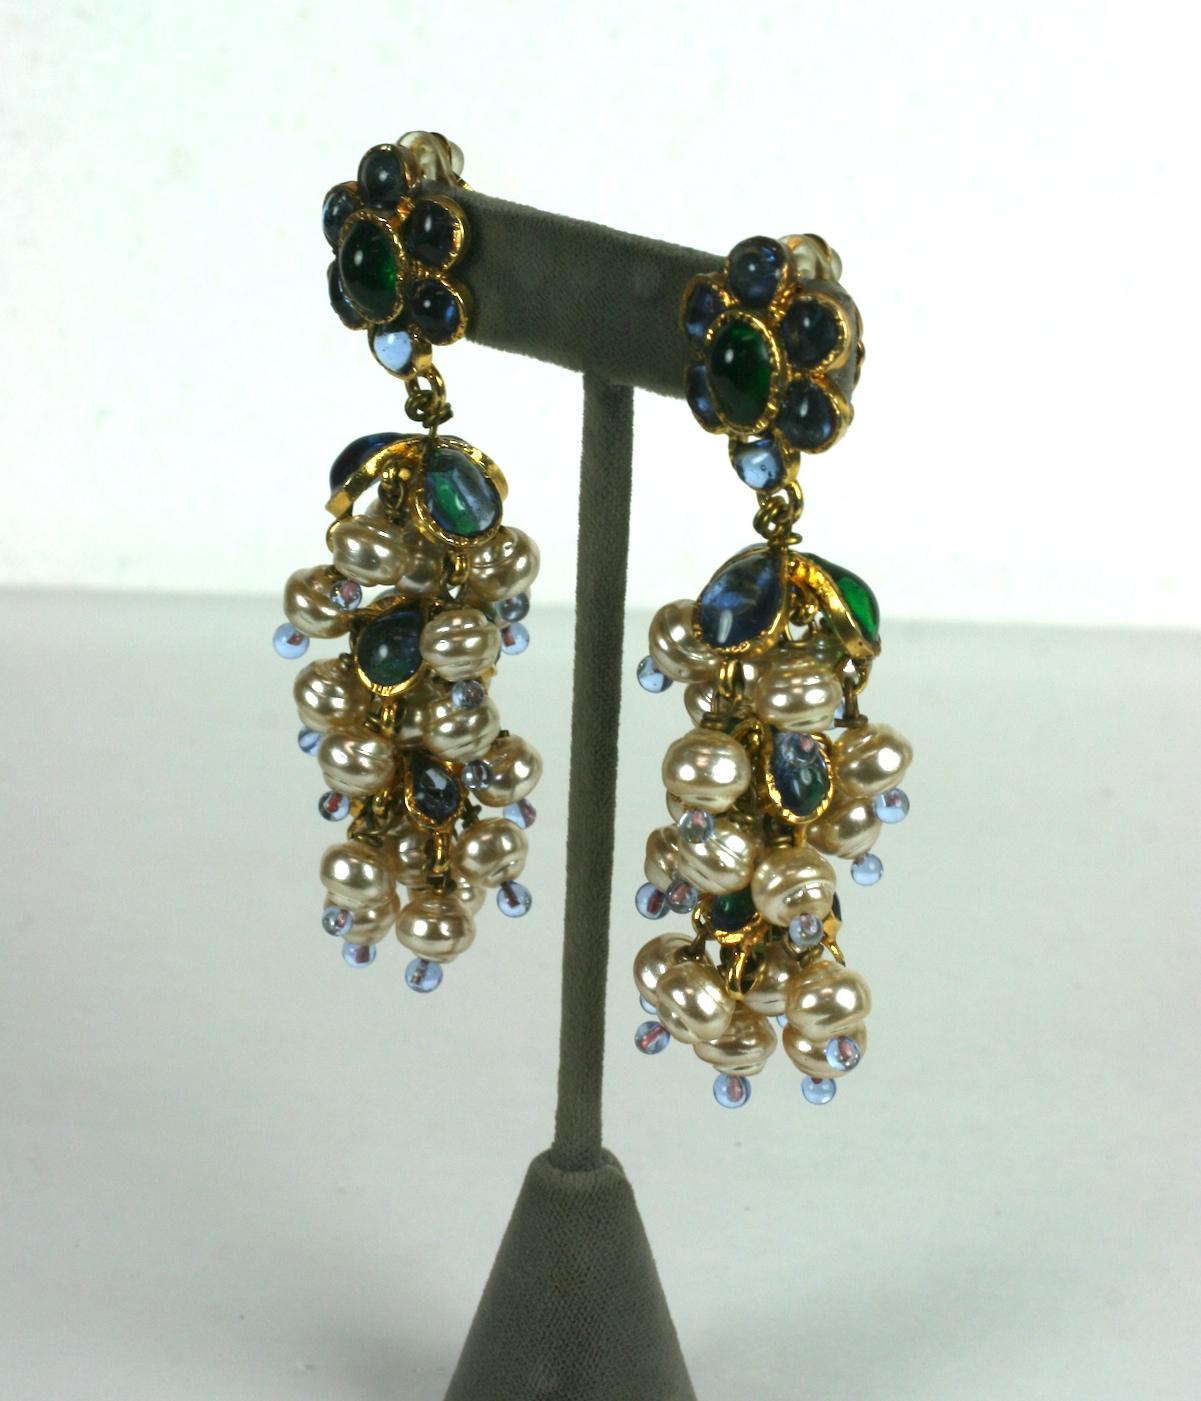 Long Anglo Indian styled earrings by Chanel. Made by hand by Maison Gripoix in Paris. Sapphire and emerald molten glass is 